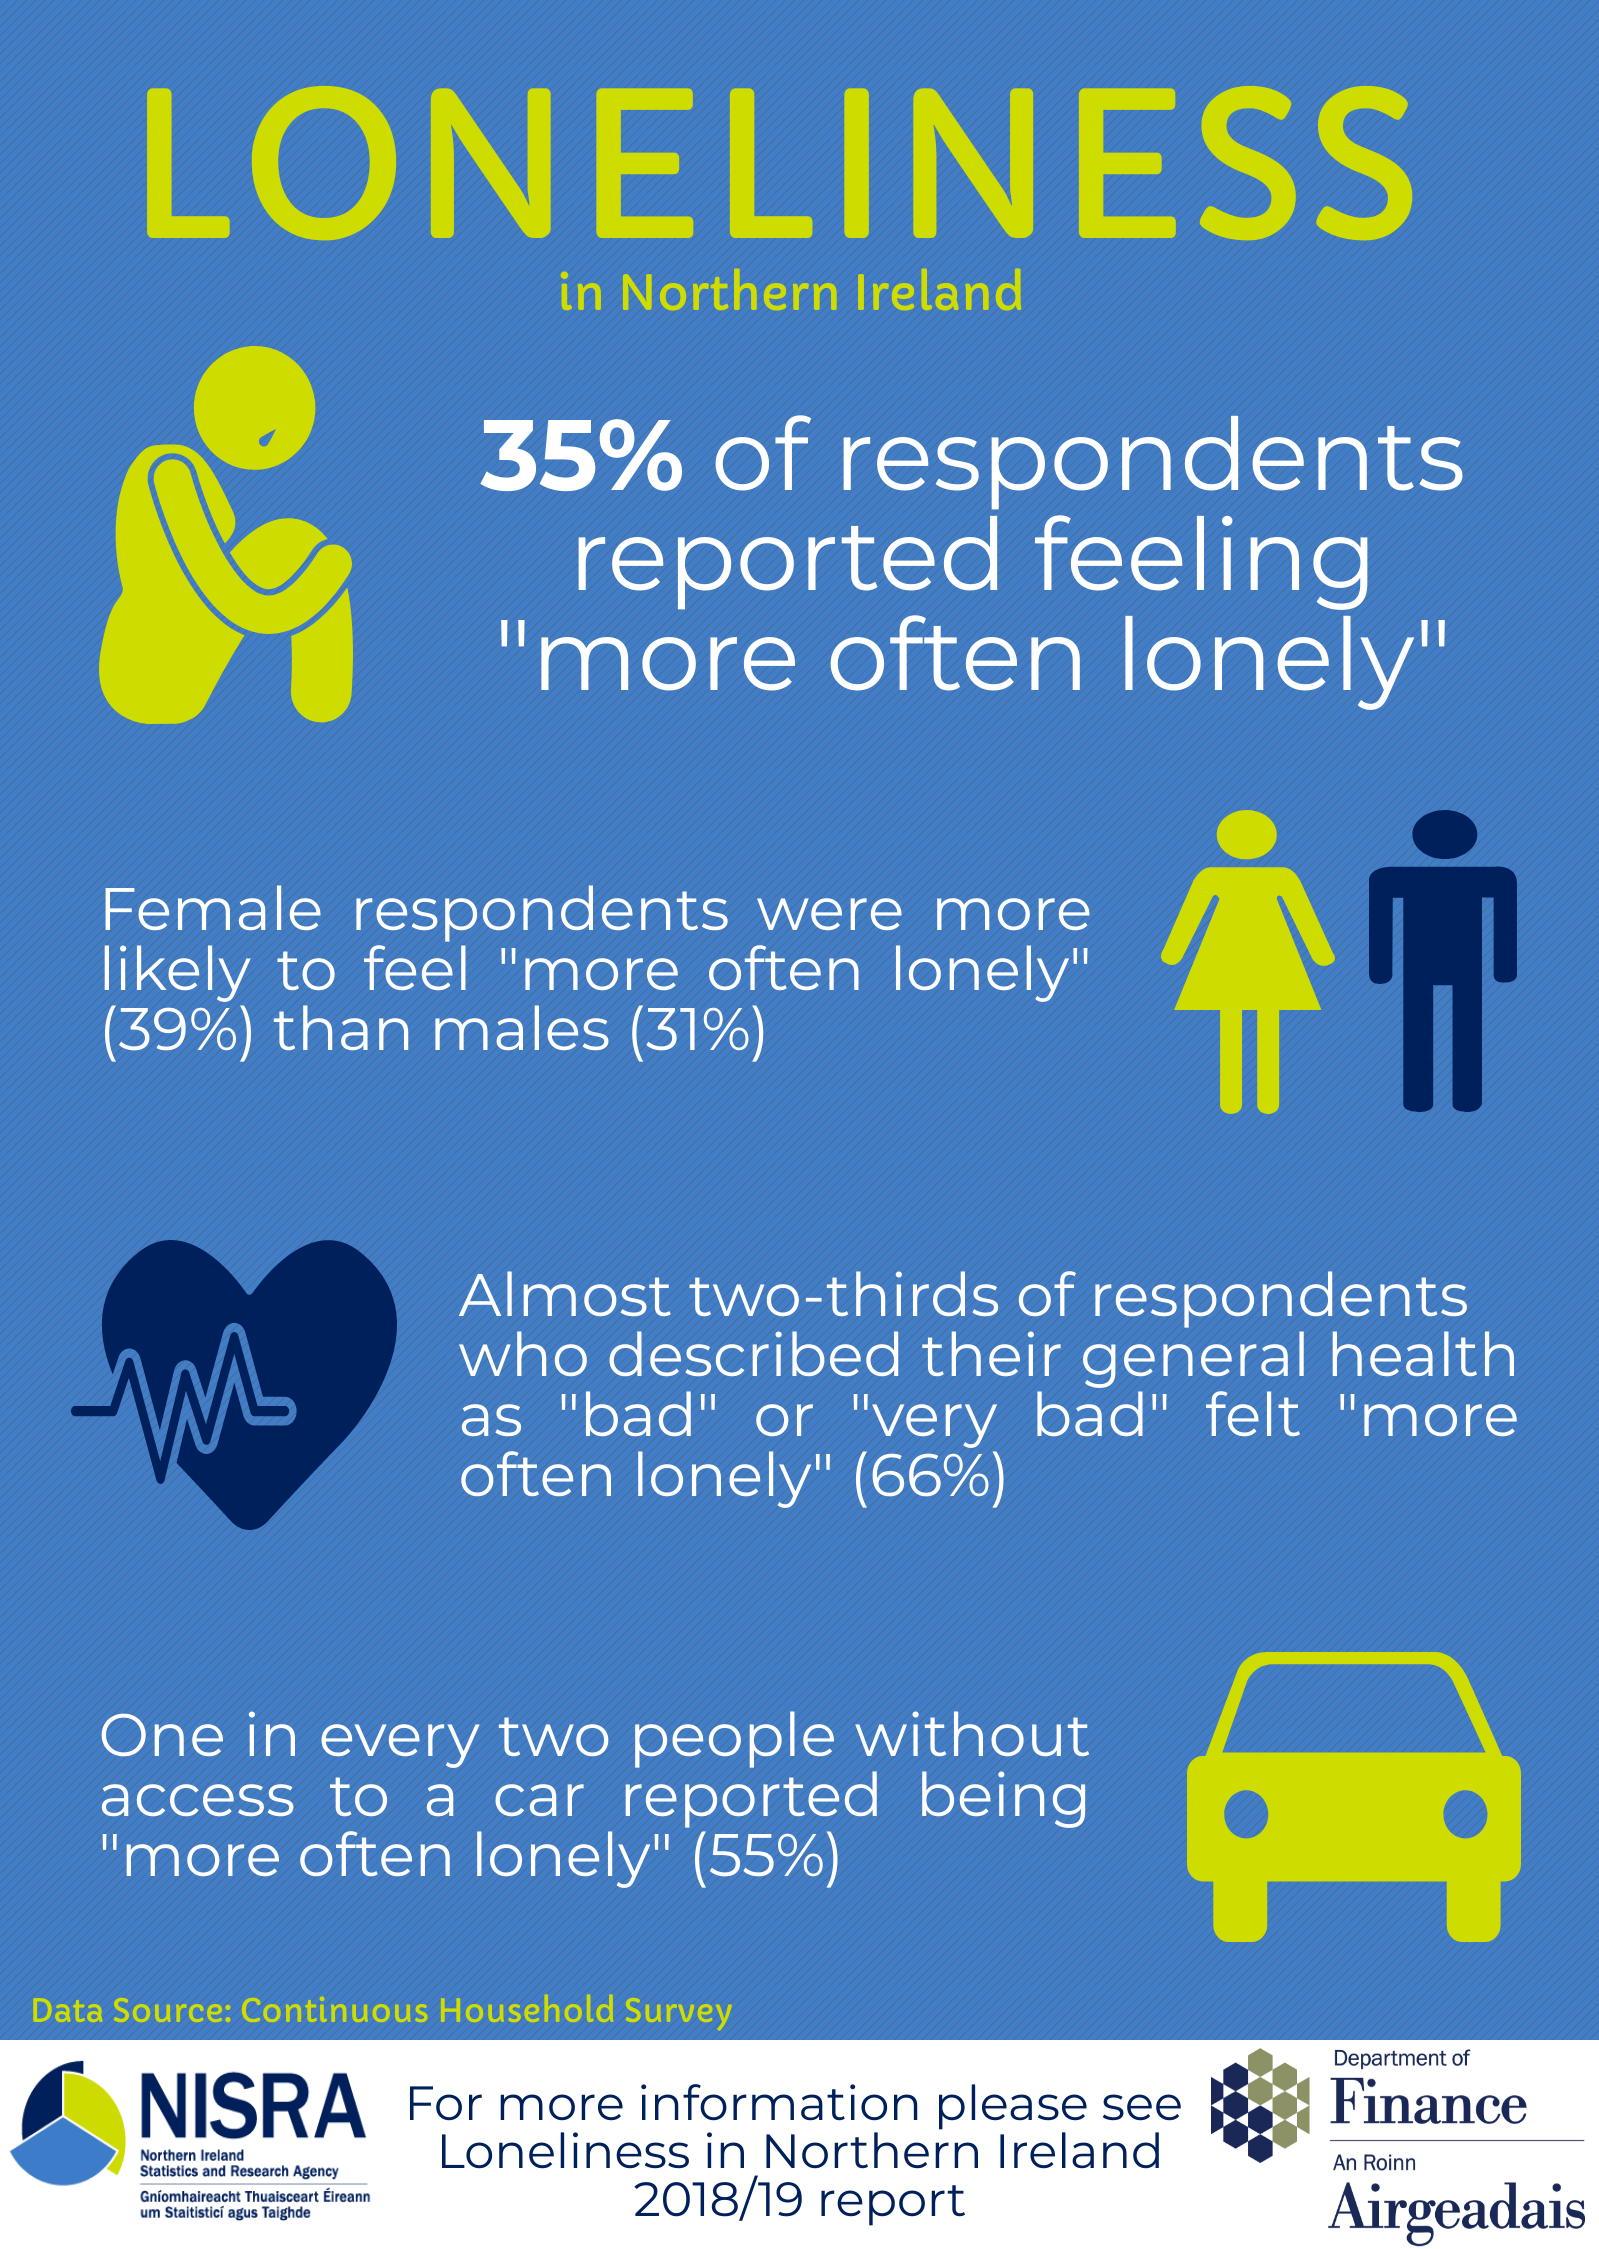 NISRA's first report on Loneliness Northern Ireland Statistics and